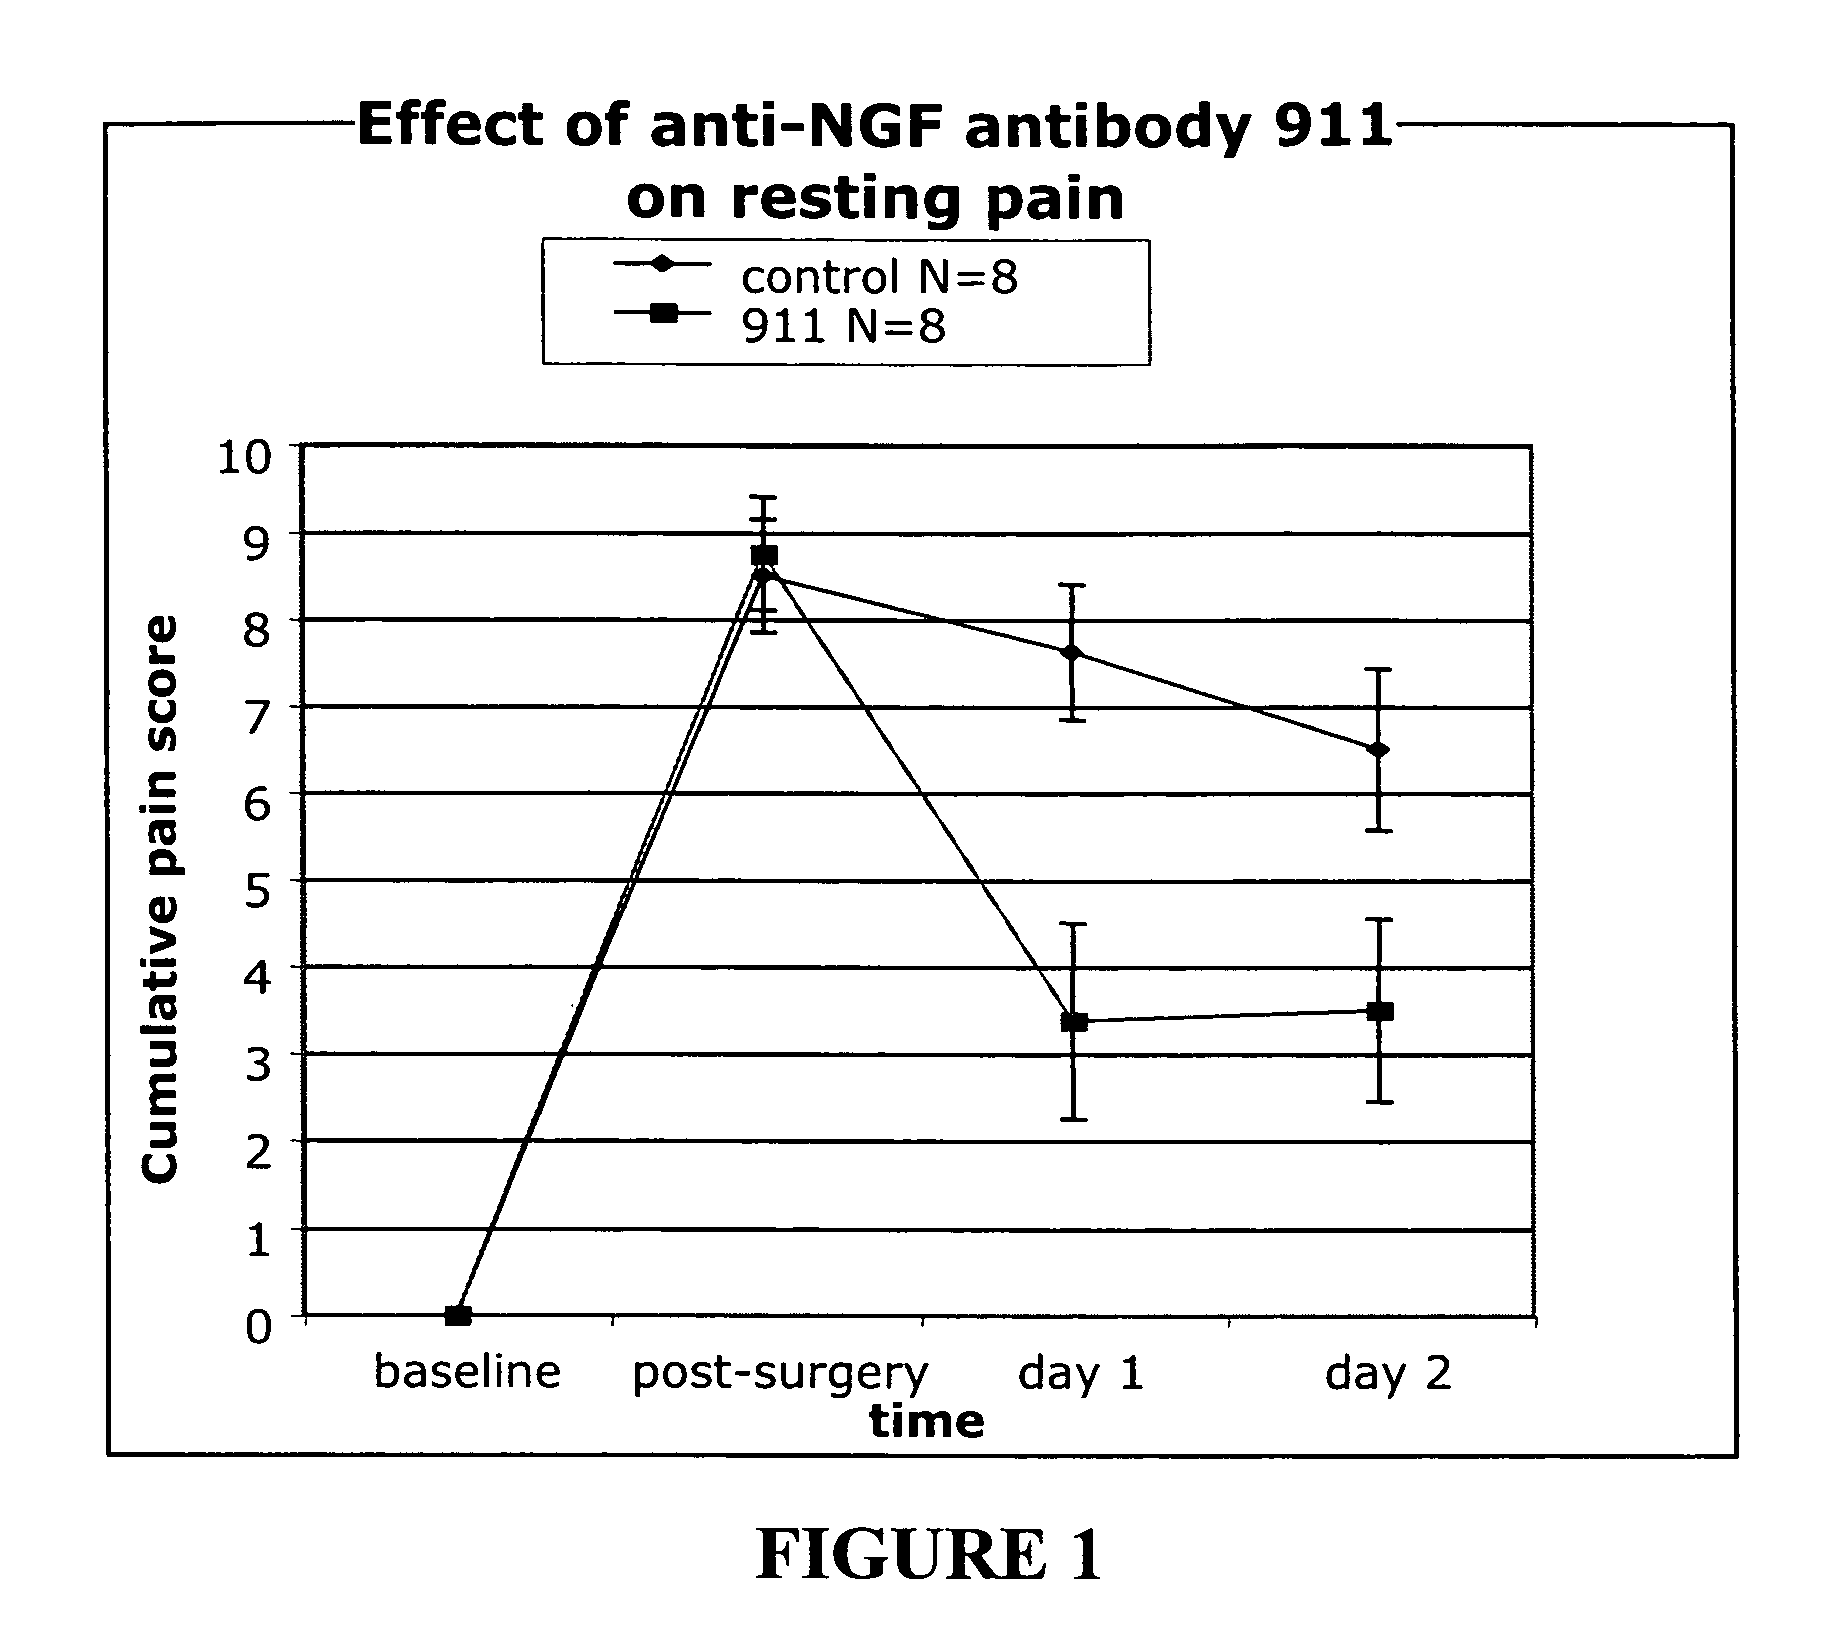 Methods for treating post-surgical pain by administering an anti-nerve growth factor antagonist